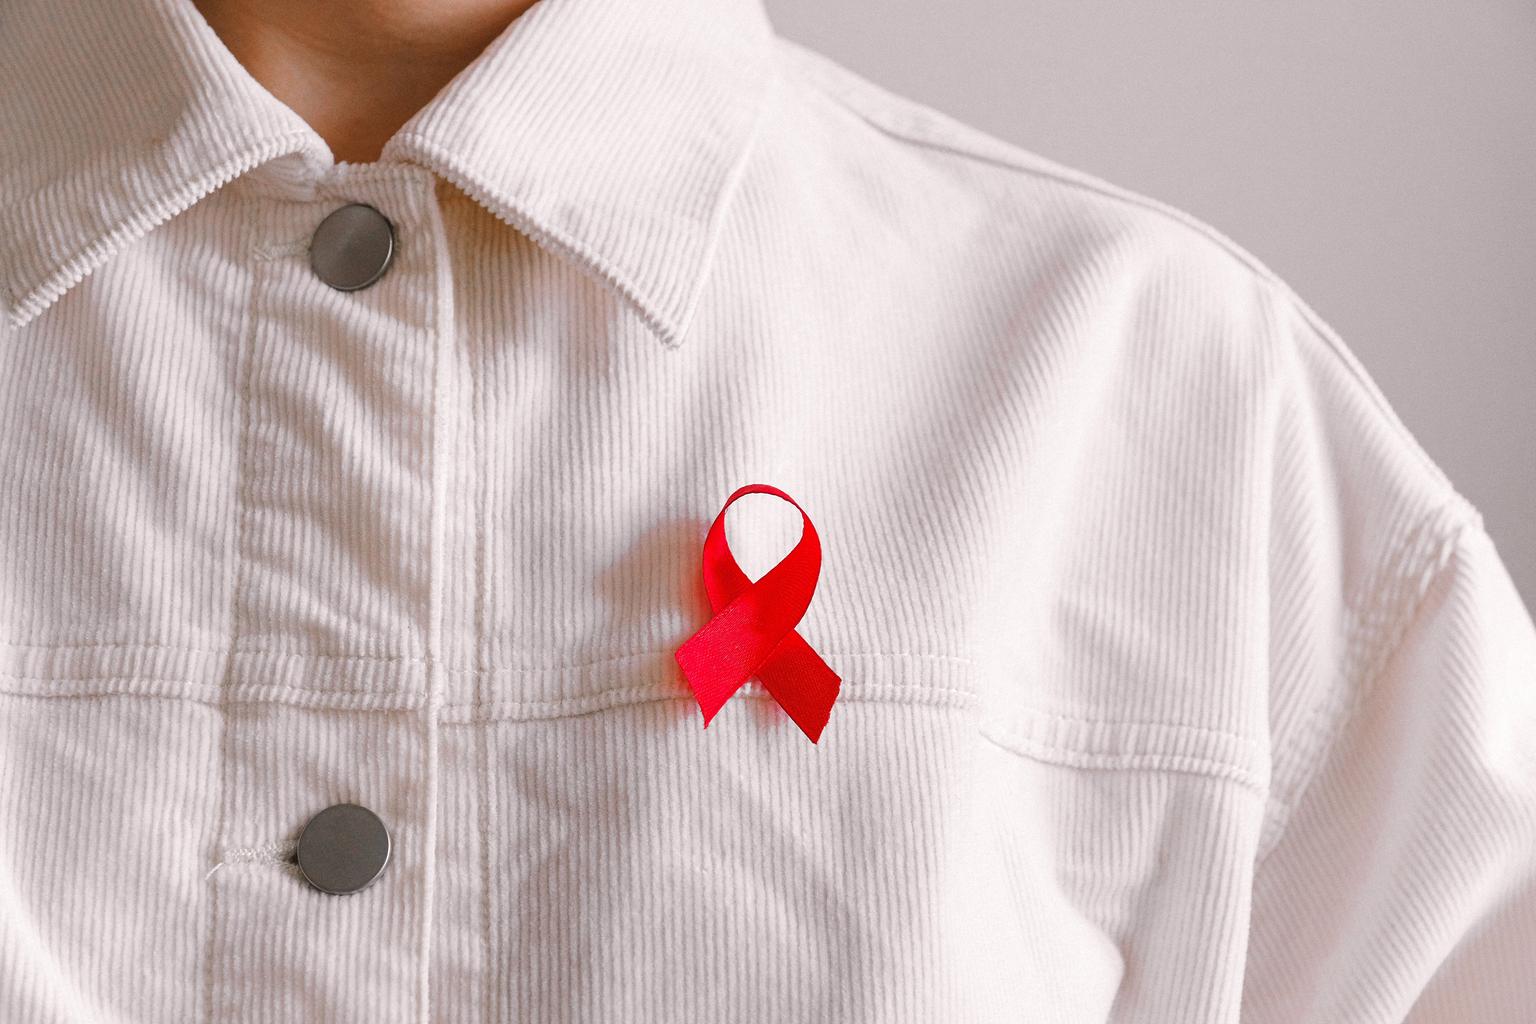 Person wearing white corduroy shirt with red HIV/AIDS ribbon displayed prominently